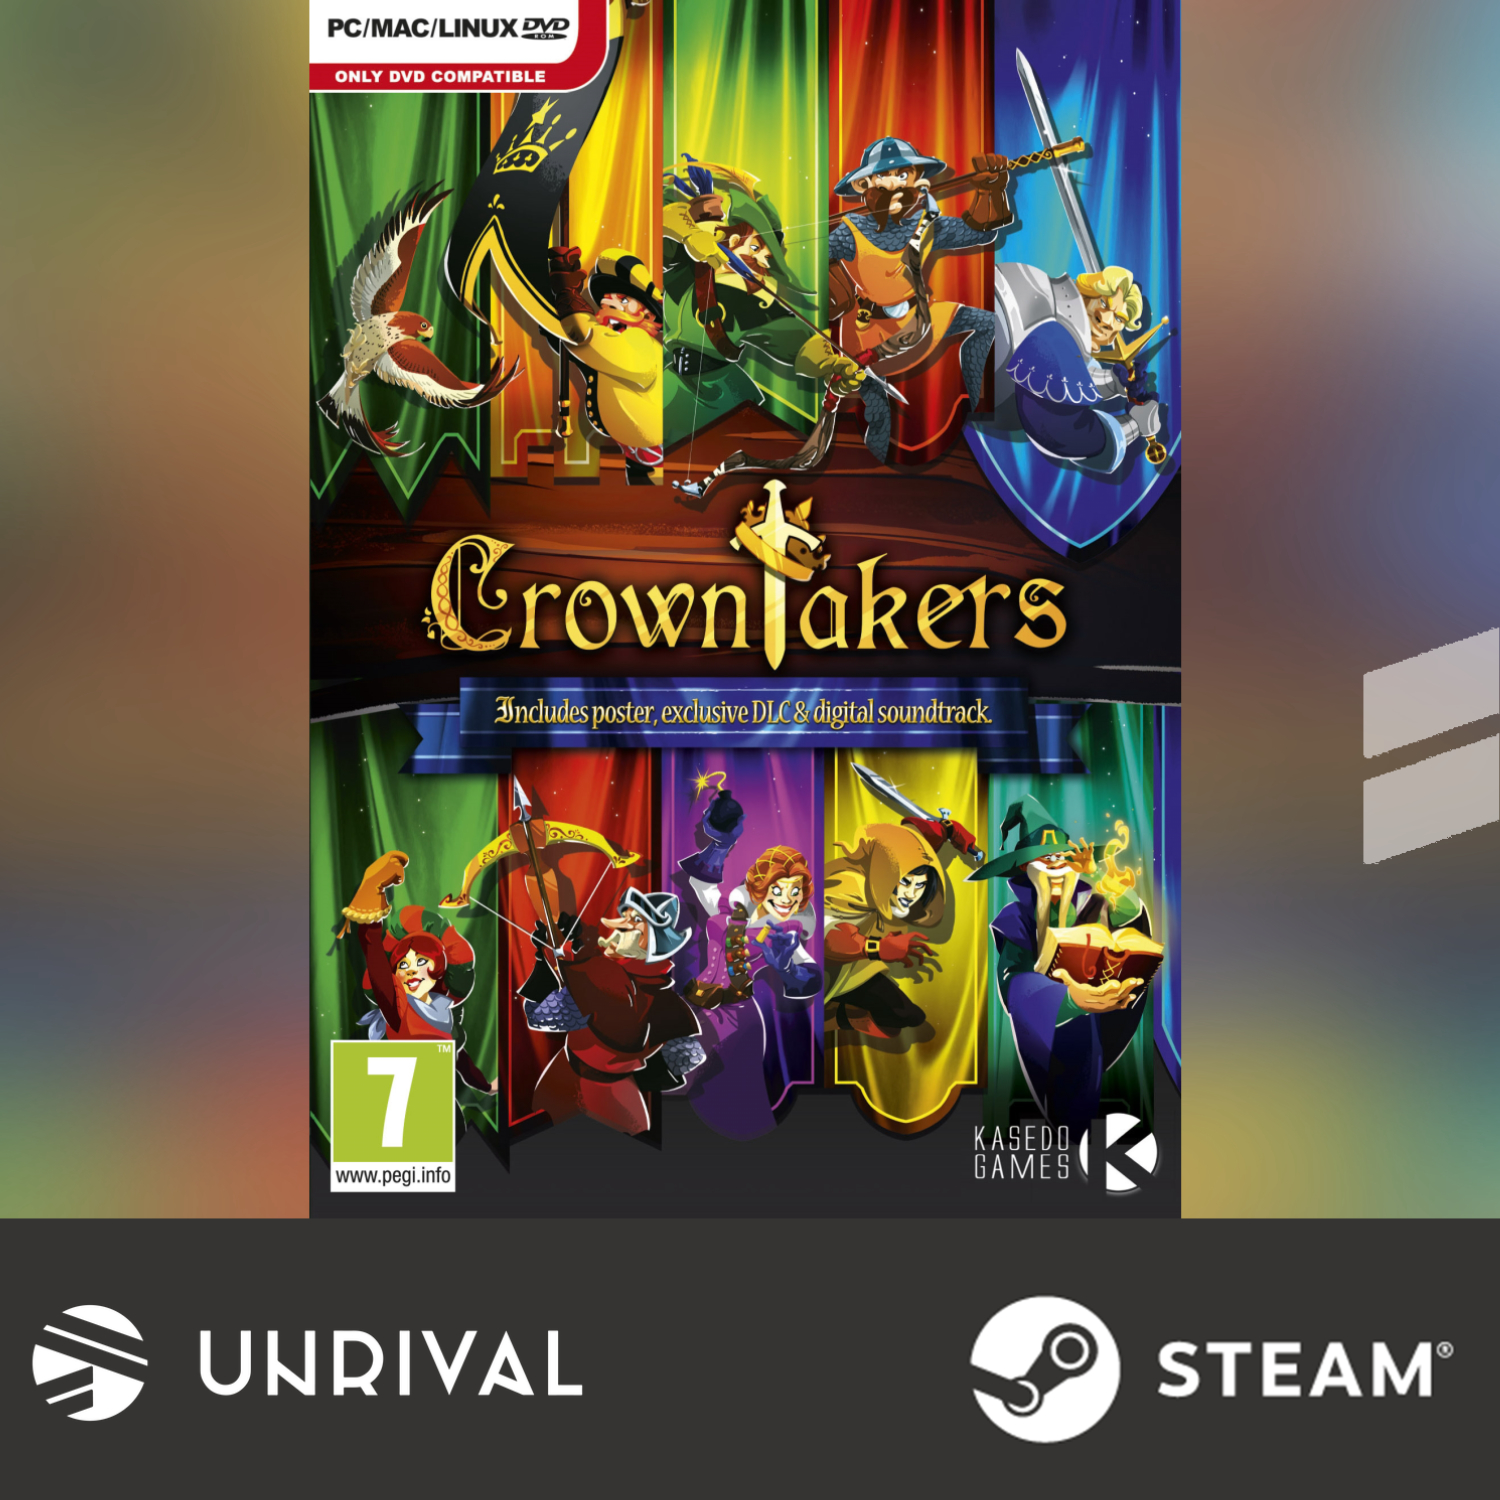 [Hot Sale] Crowntakers PC Digital Download Game (Single Player) - Unrival